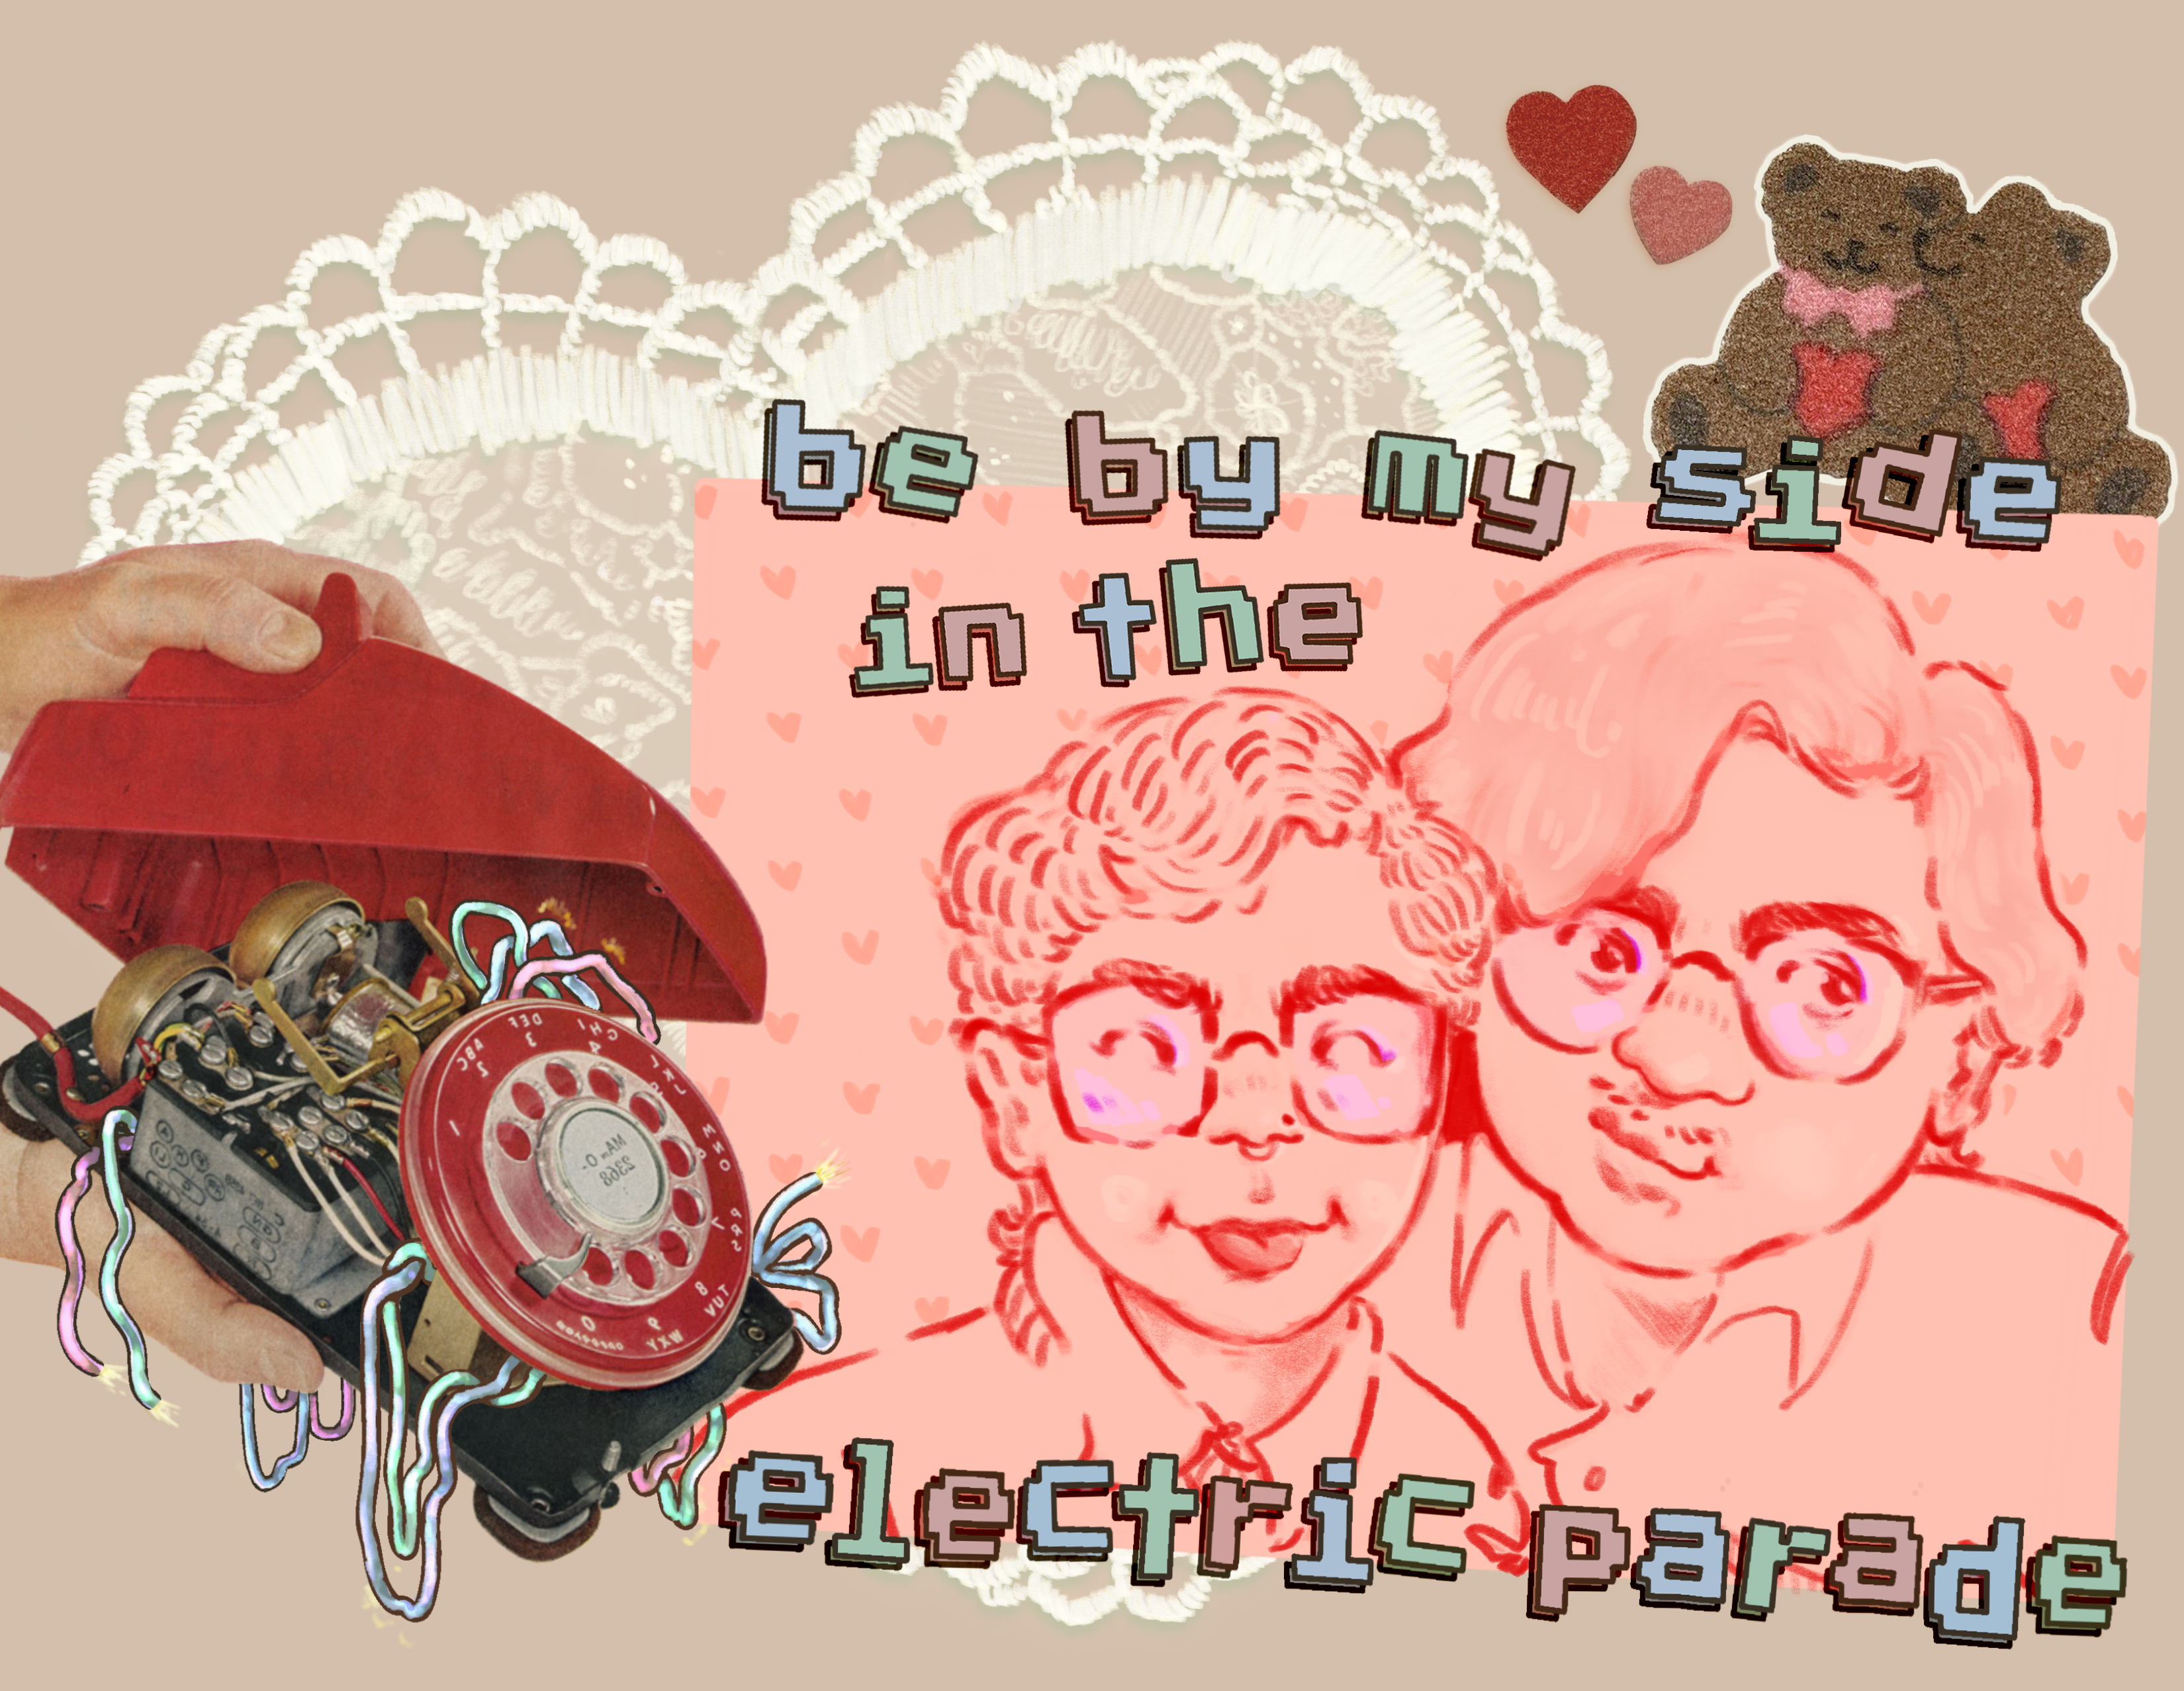 digital collage using illustrated and cut out elements. From left to right there is: a magazine cut out of a rotary phone with the casing being held open, pink/ blue/ green wires are drawn over the exposed machinery - a lace heart doily (in the background) - a drawing of me an my partner in red pencil, I have my eyes closed and am sticking my tongue out, my partner is looking to their left and smirking - drawn text that reads 'be by my side in the electric parade' - and cut out stickers of two bears snuggling with hearts.